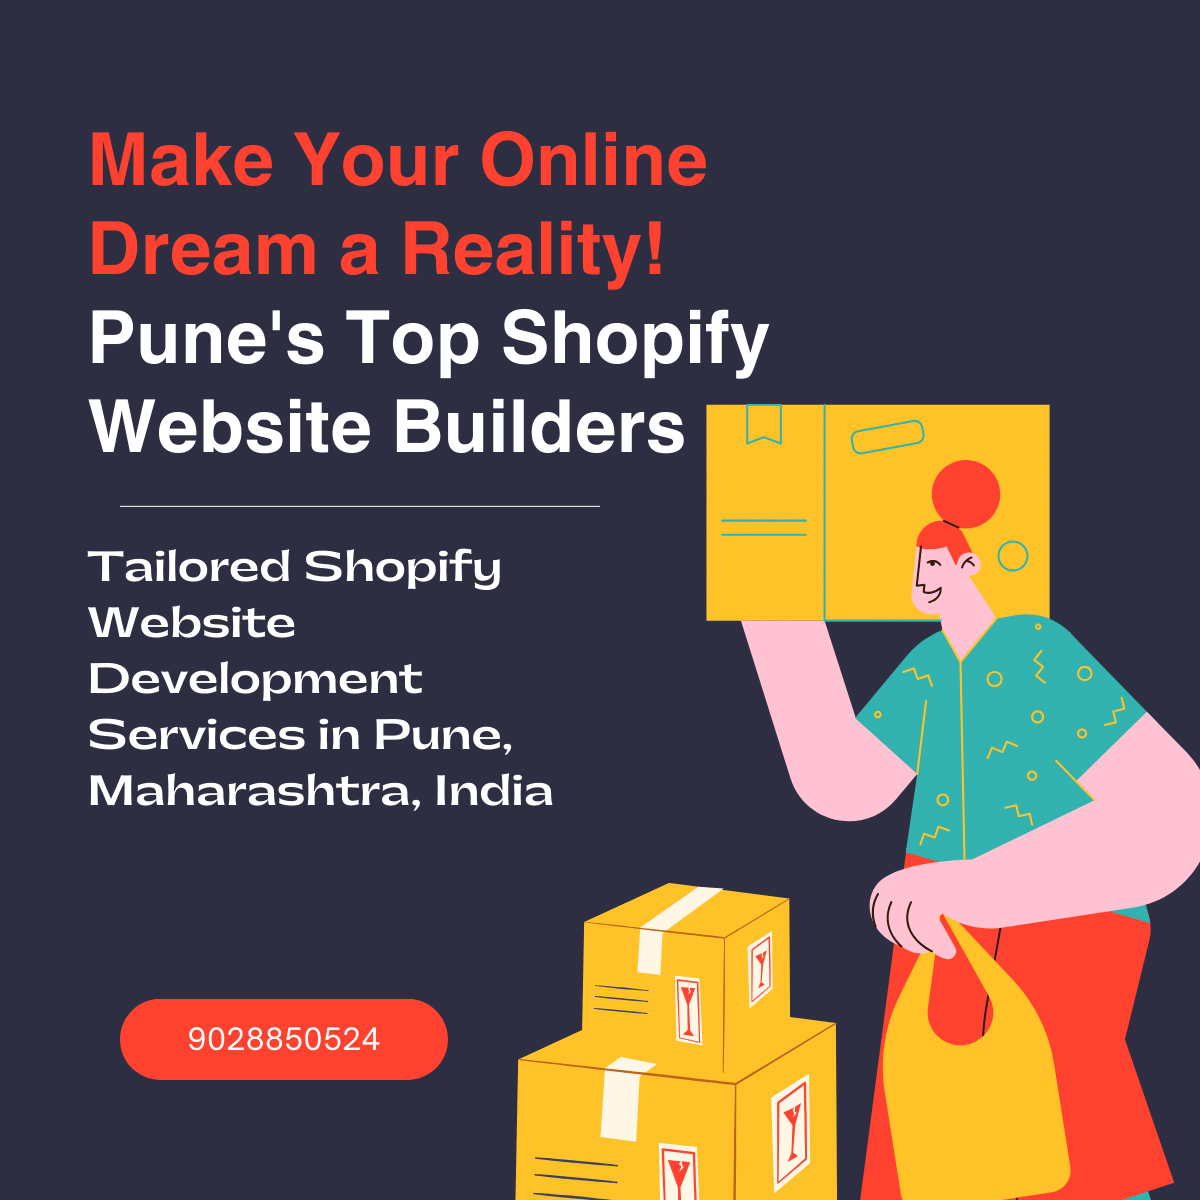 Make Your Online Dream a Reality! Pune's Top Shopify Website Builders